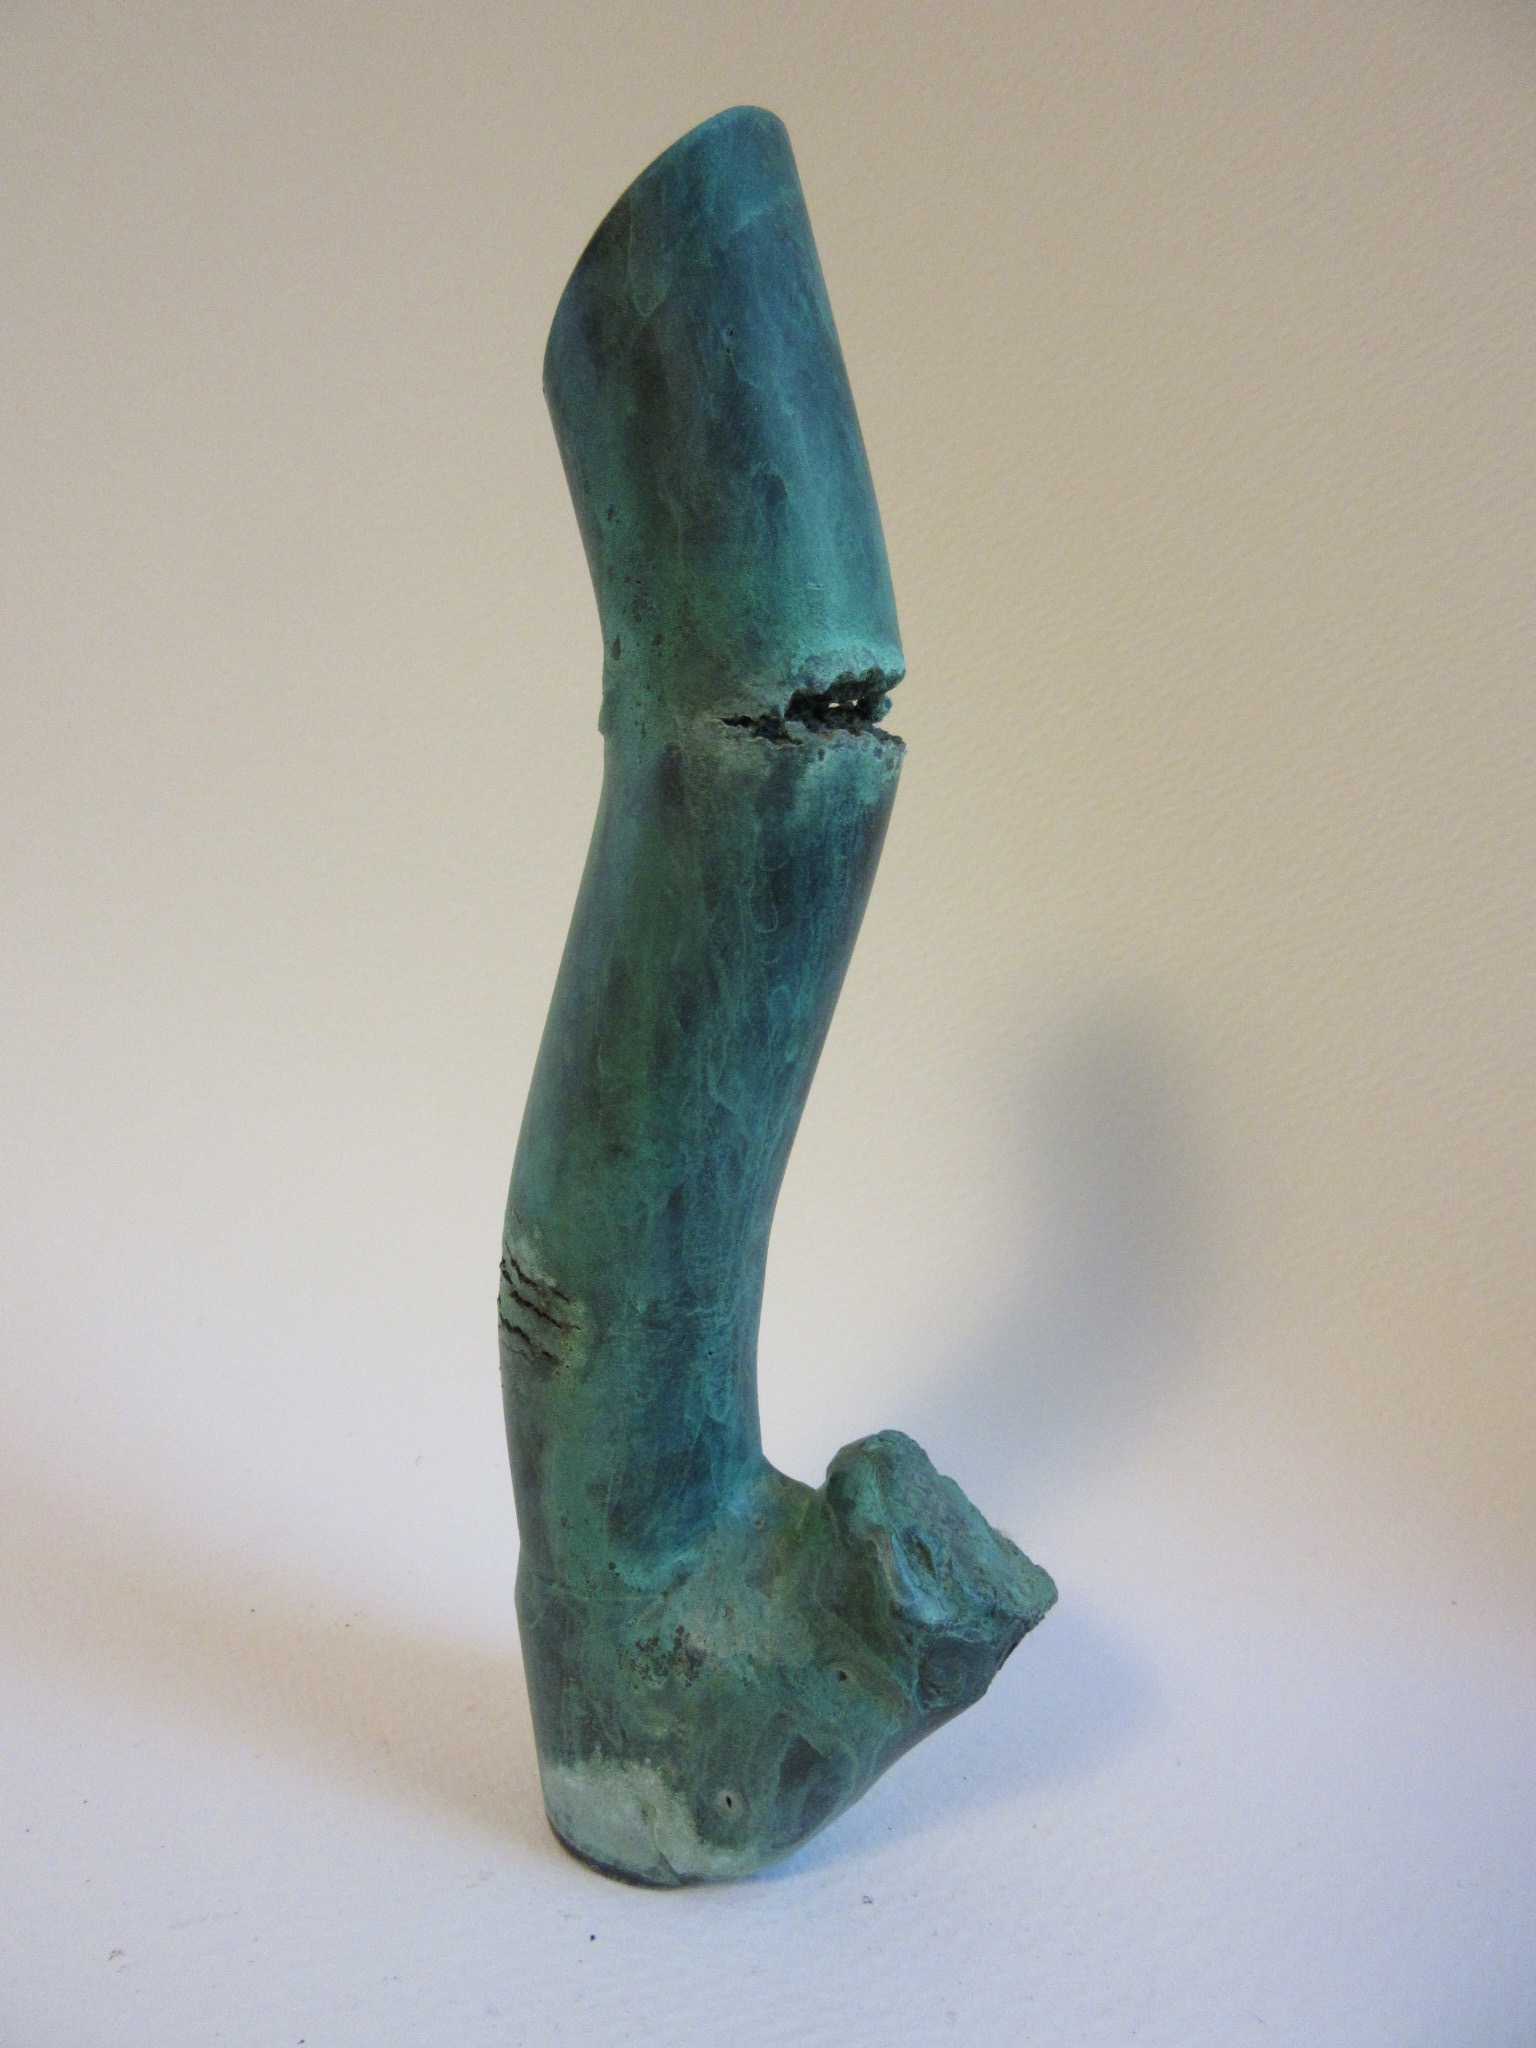   Untitled , bronze 7.25" x 2.5" Gifted 